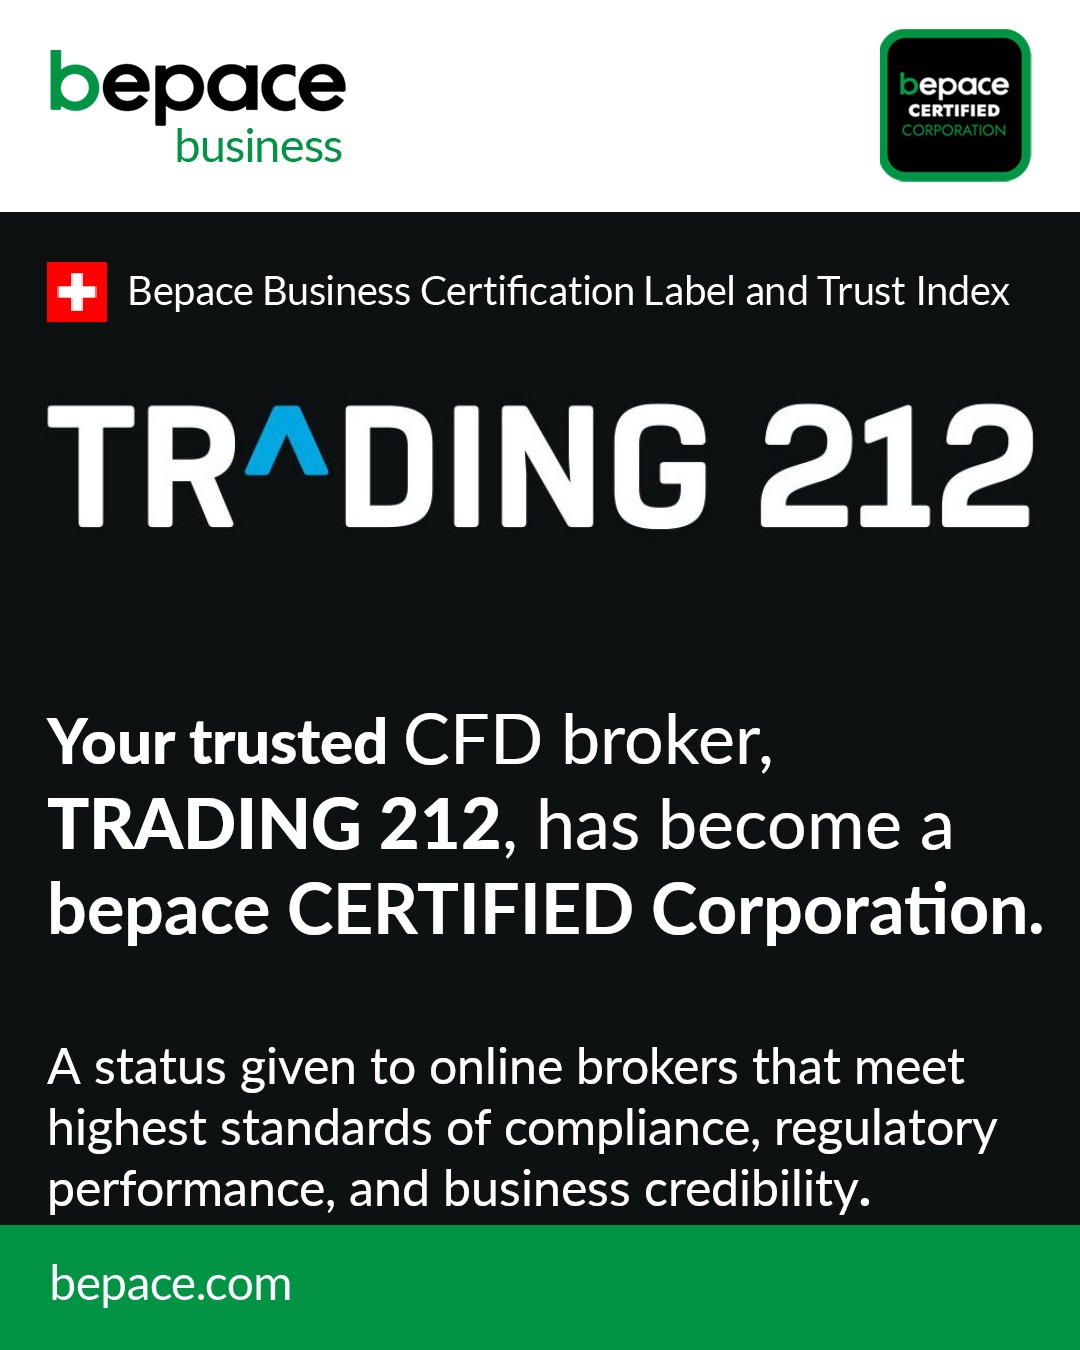 Trading 212: The latest Bepace-Certified Corporation